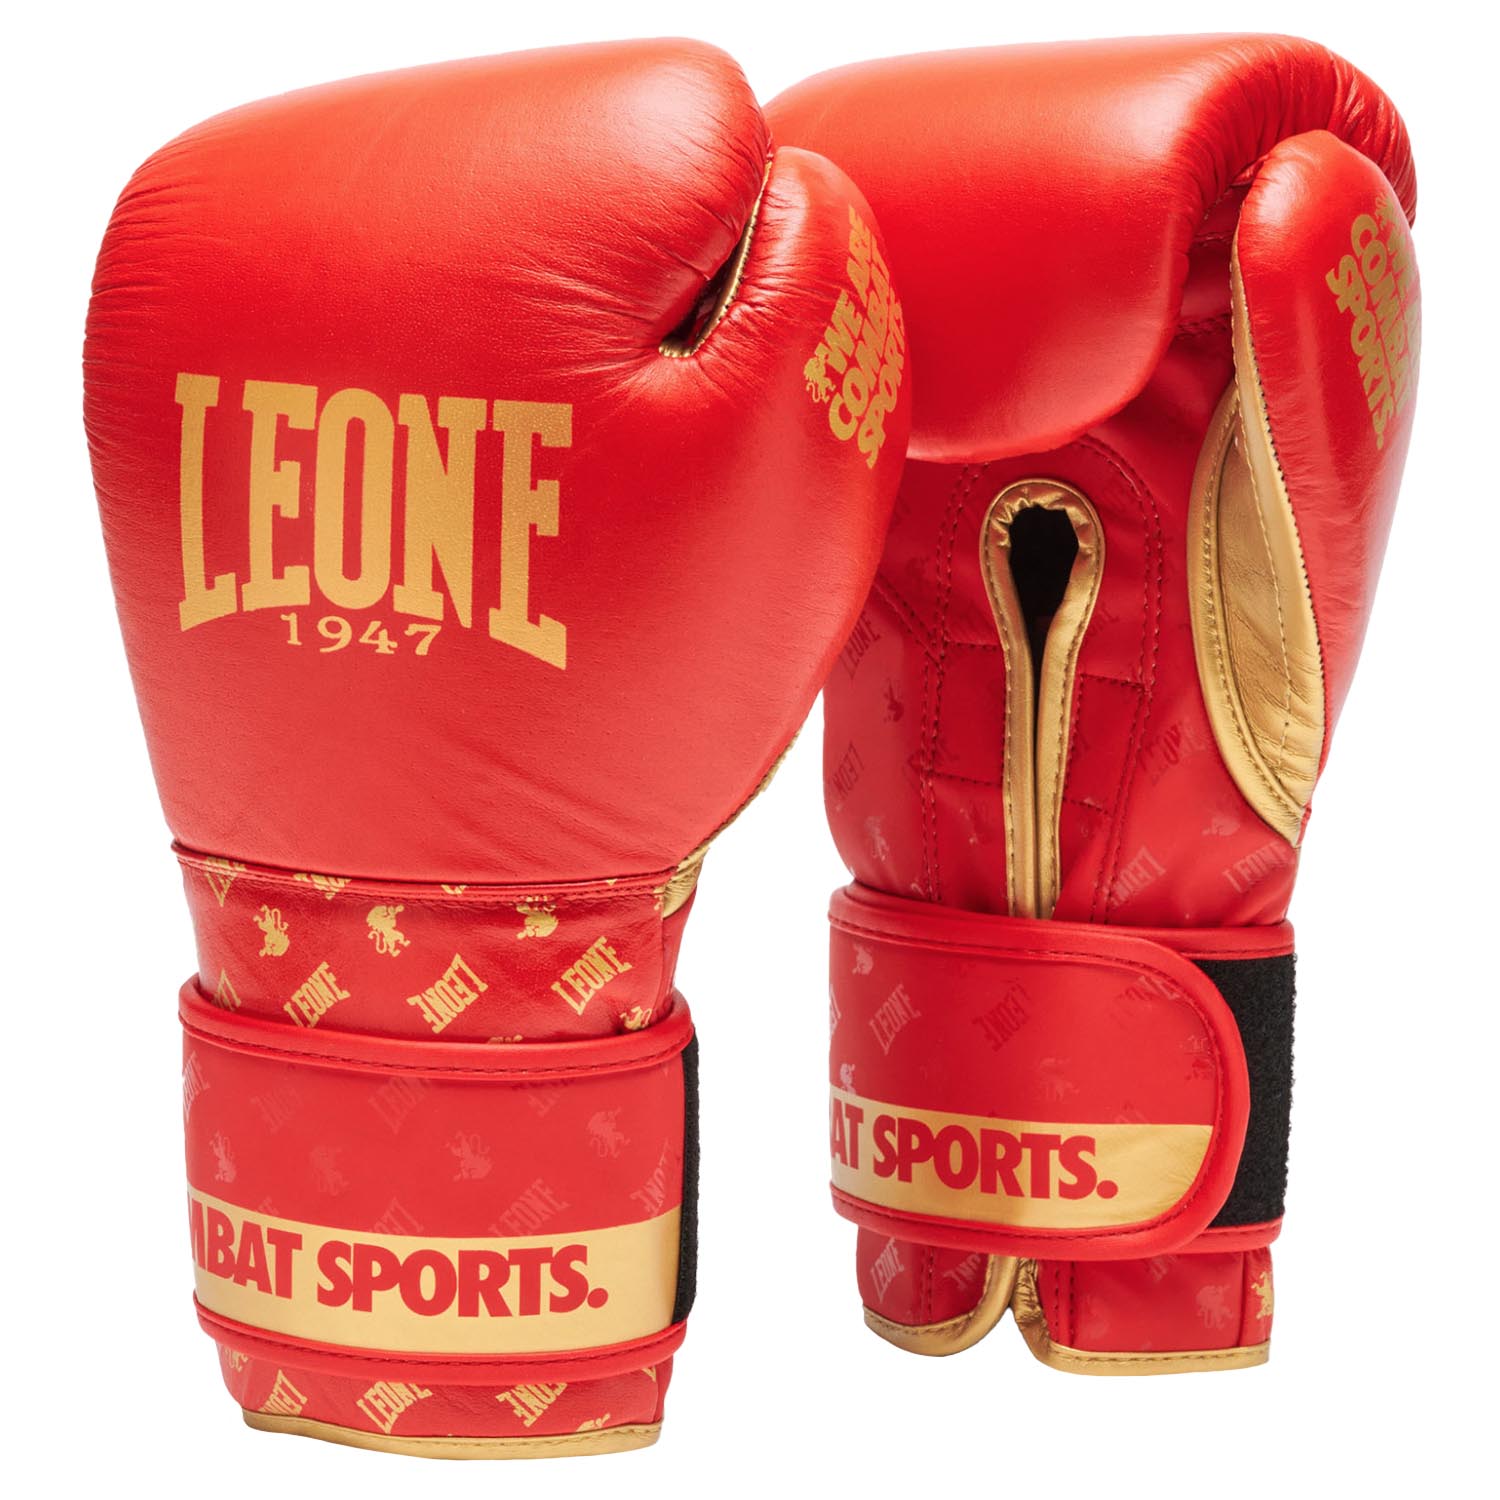 LEONE Boxing Gloves, DNA, GN220, red-gold 12 Oz